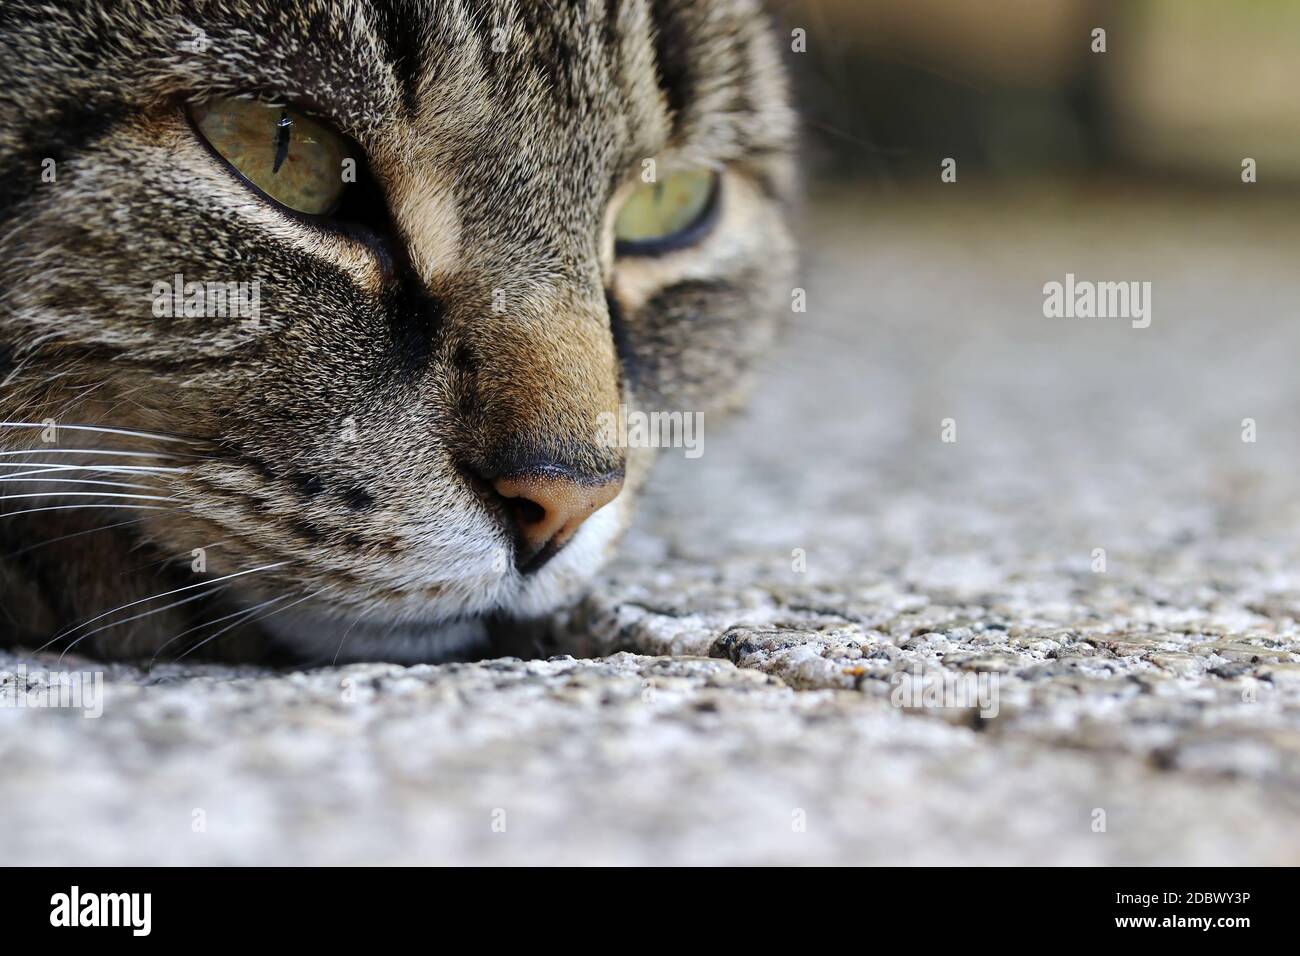 The face of a cat lying flat on the floor in wait Stock Photo